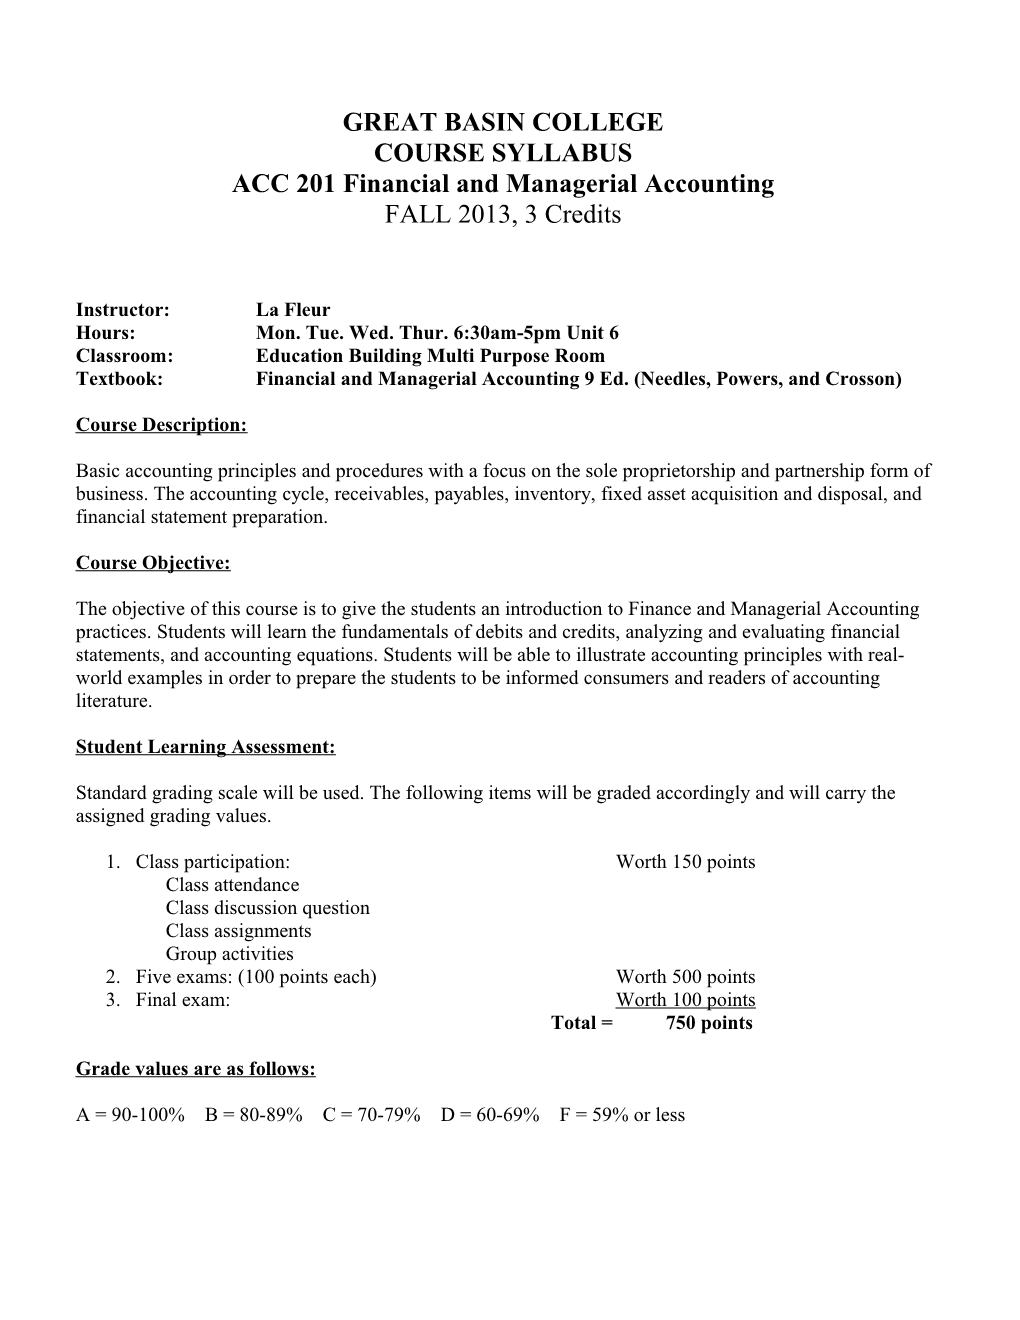 ACC 201 Financial and Managerial Accounting